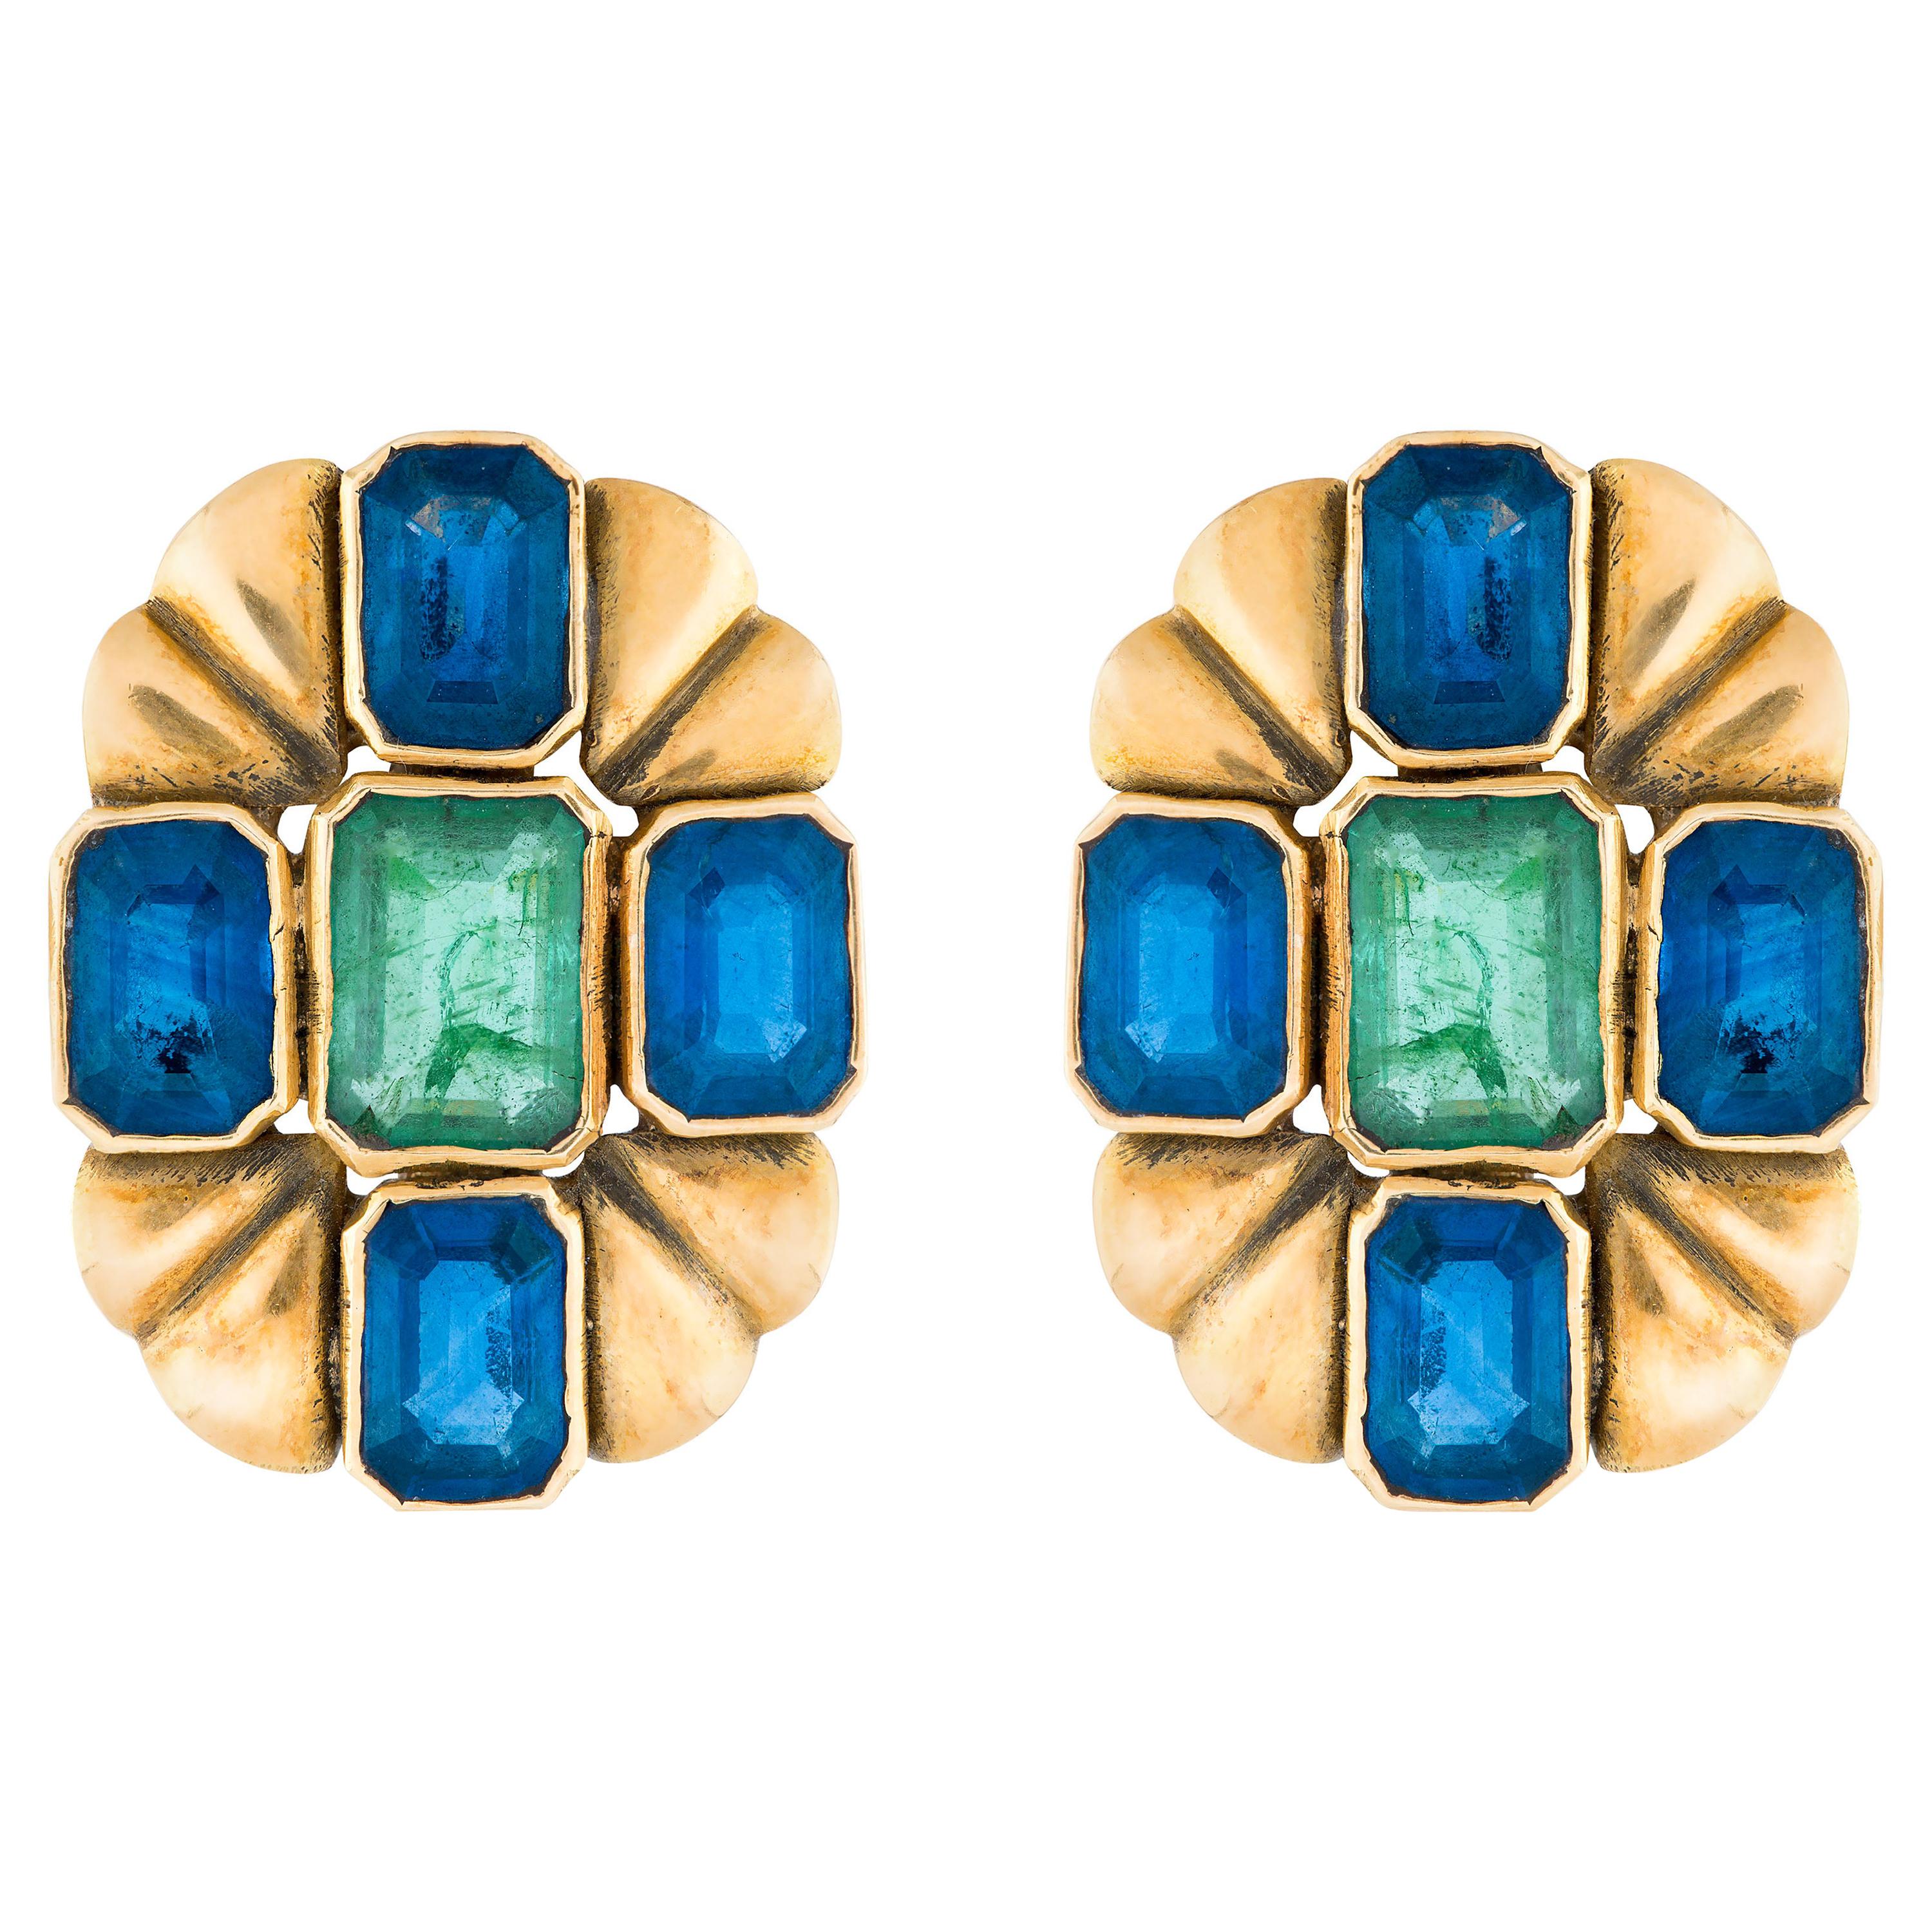 Amrapali Jewels 18 Karat Gold, Sapphire and Emerald Earrings For Sale